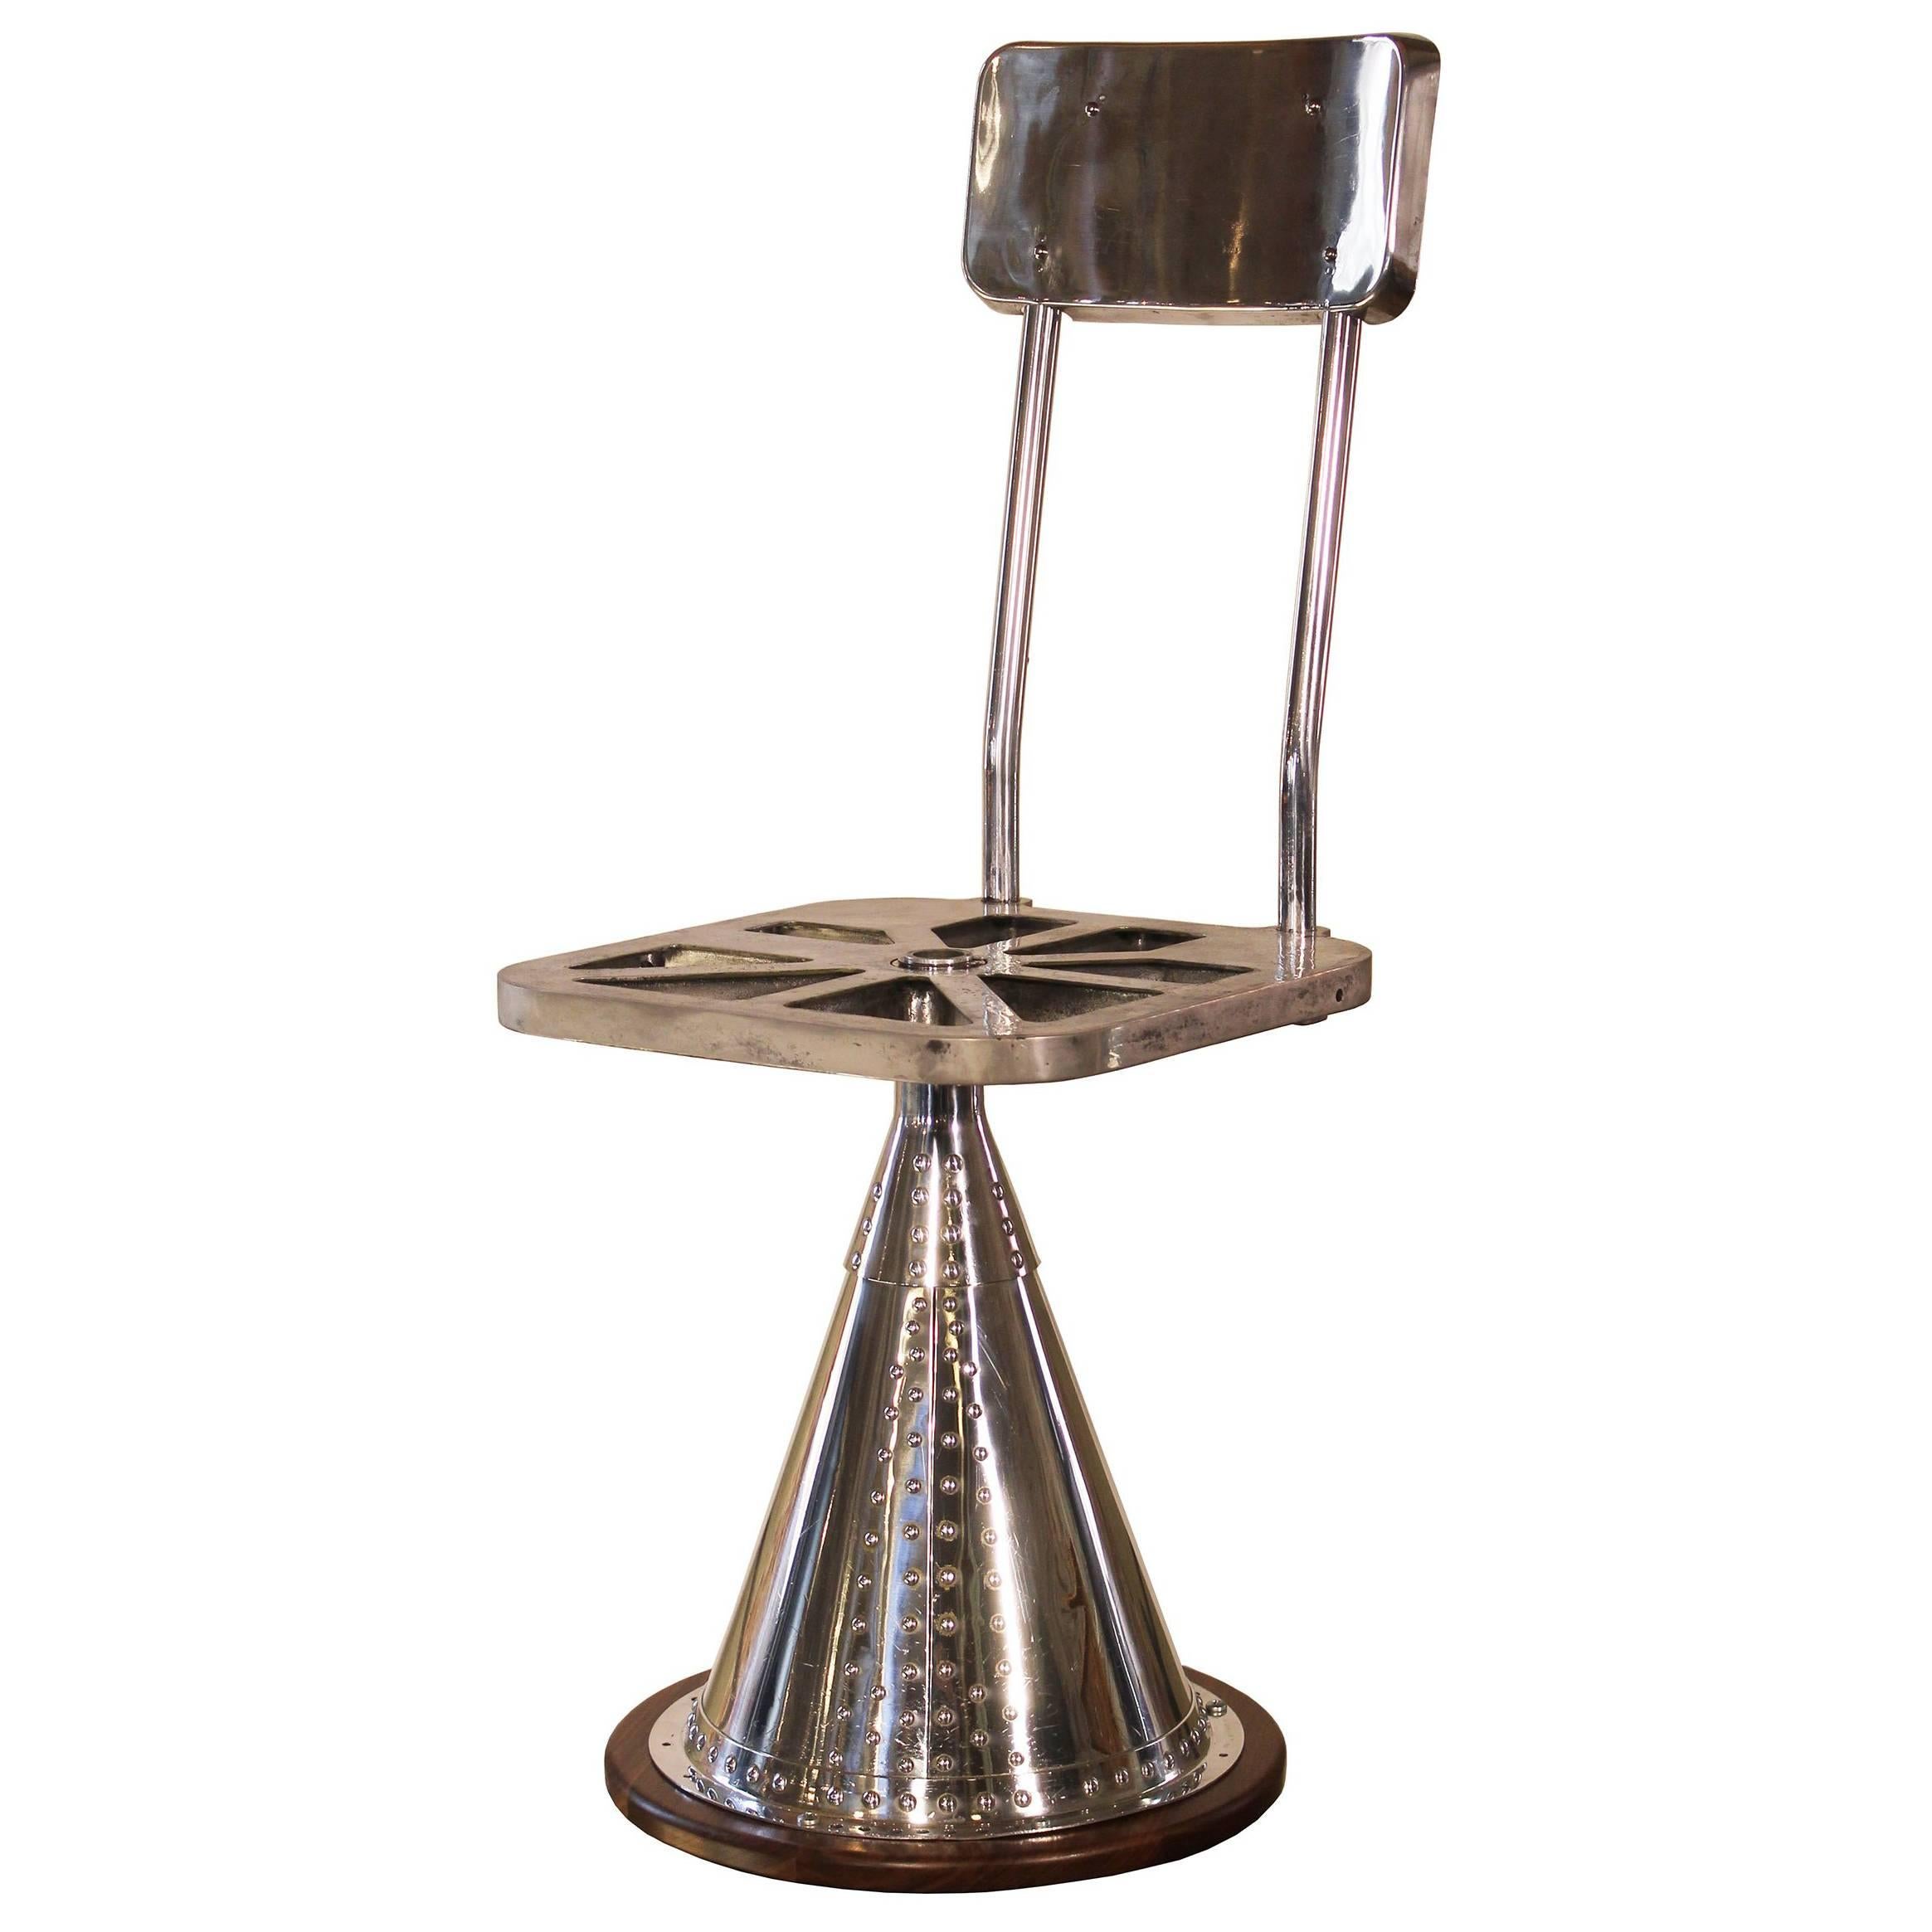 Bomber Stool Seat Chair Vintage Polished Aluminum Aircraft Airplane Swivel